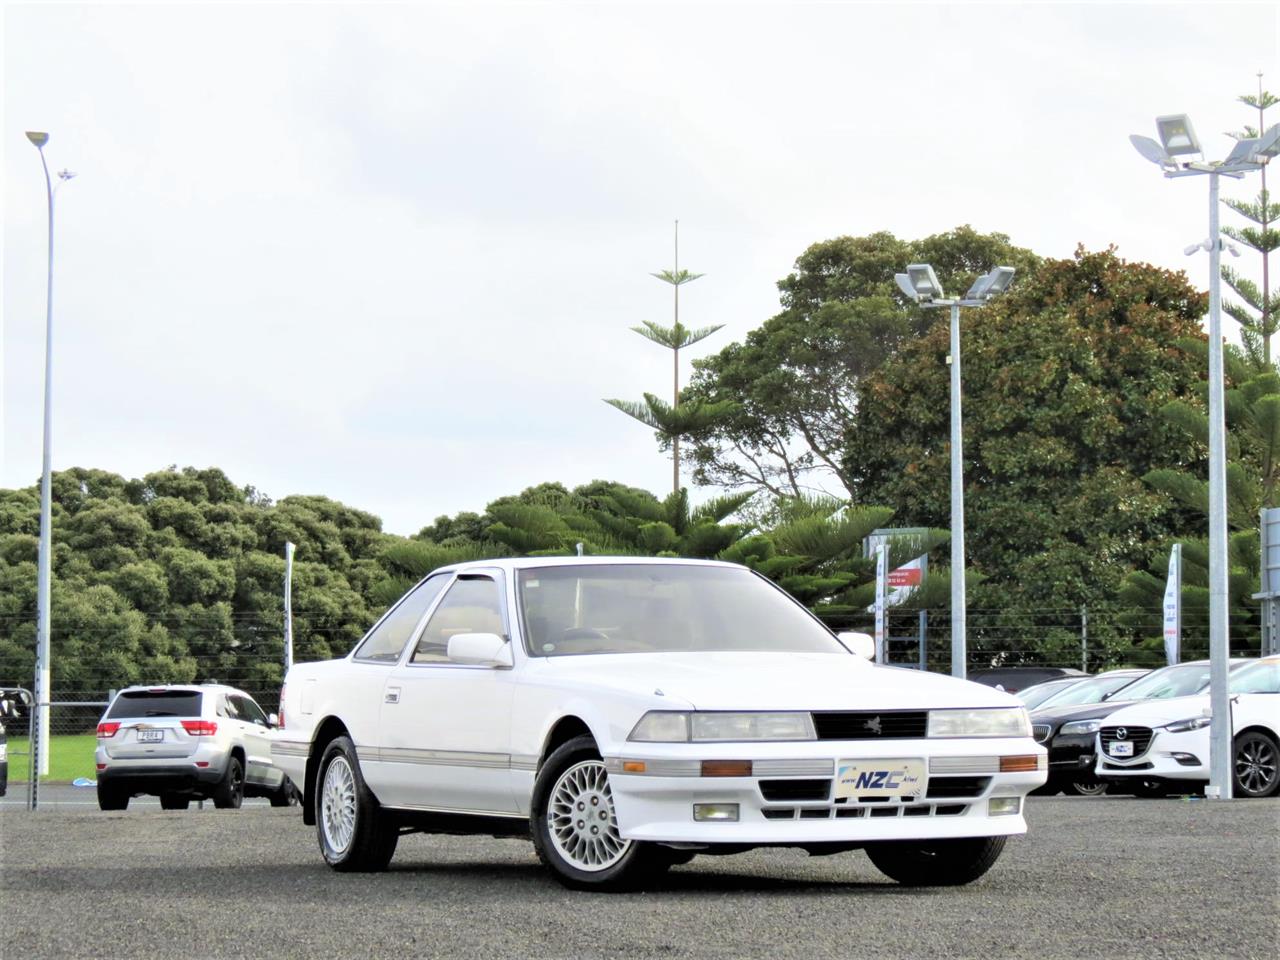 NZC 1989 Toyota SOARER just arrived to Auckland